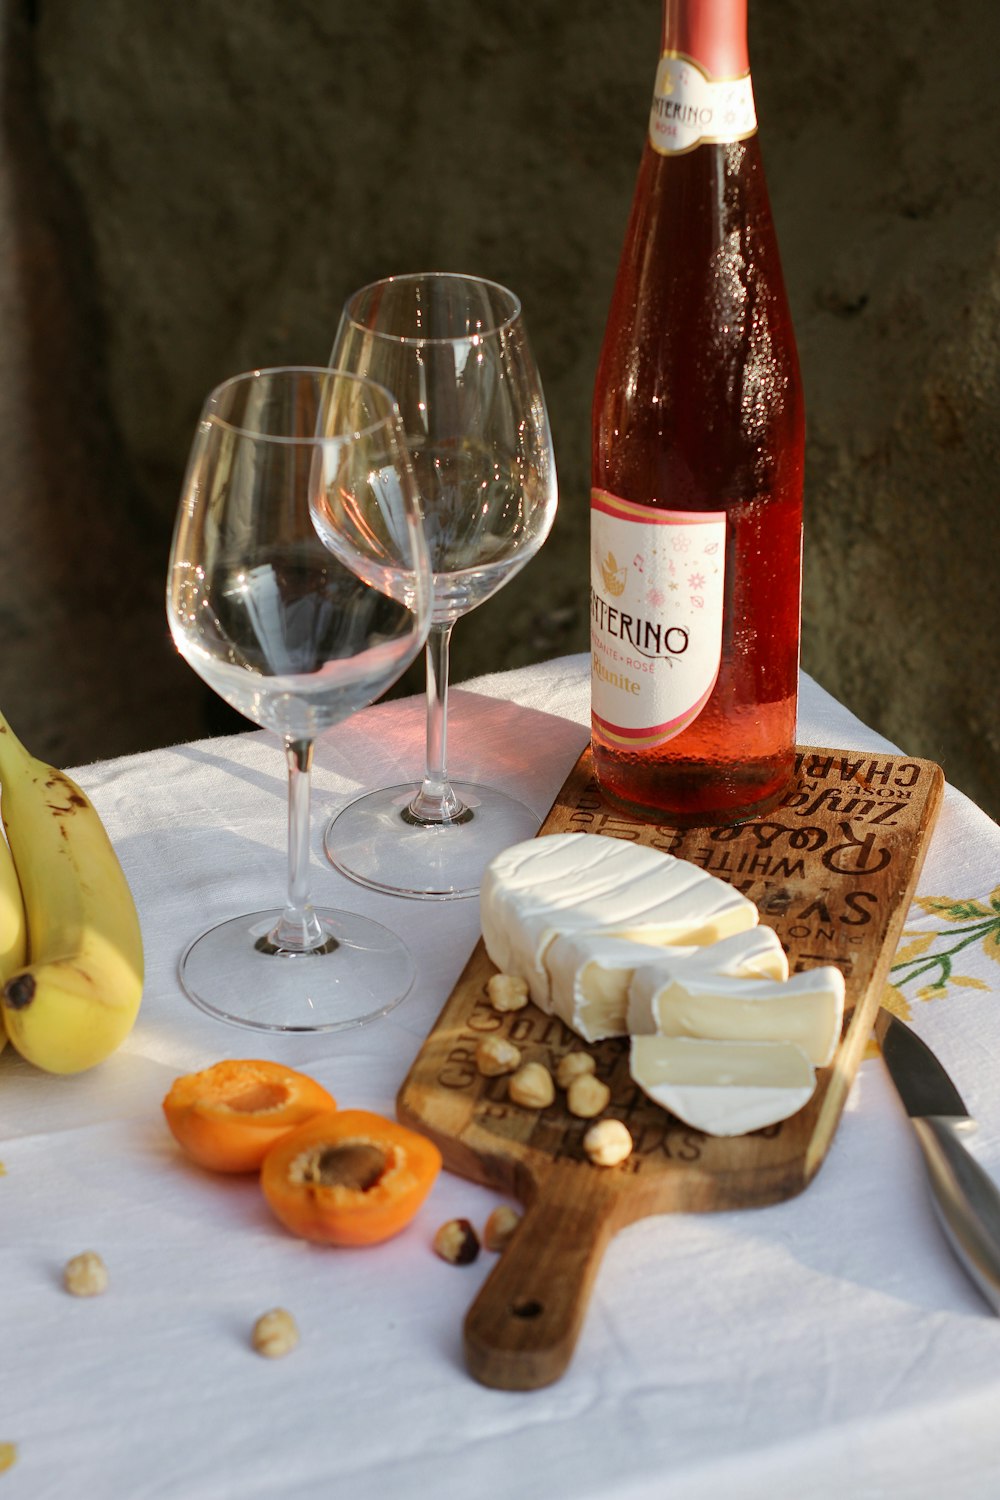 clear wine glass beside brown wooden chopping board with sliced banana and brown bread